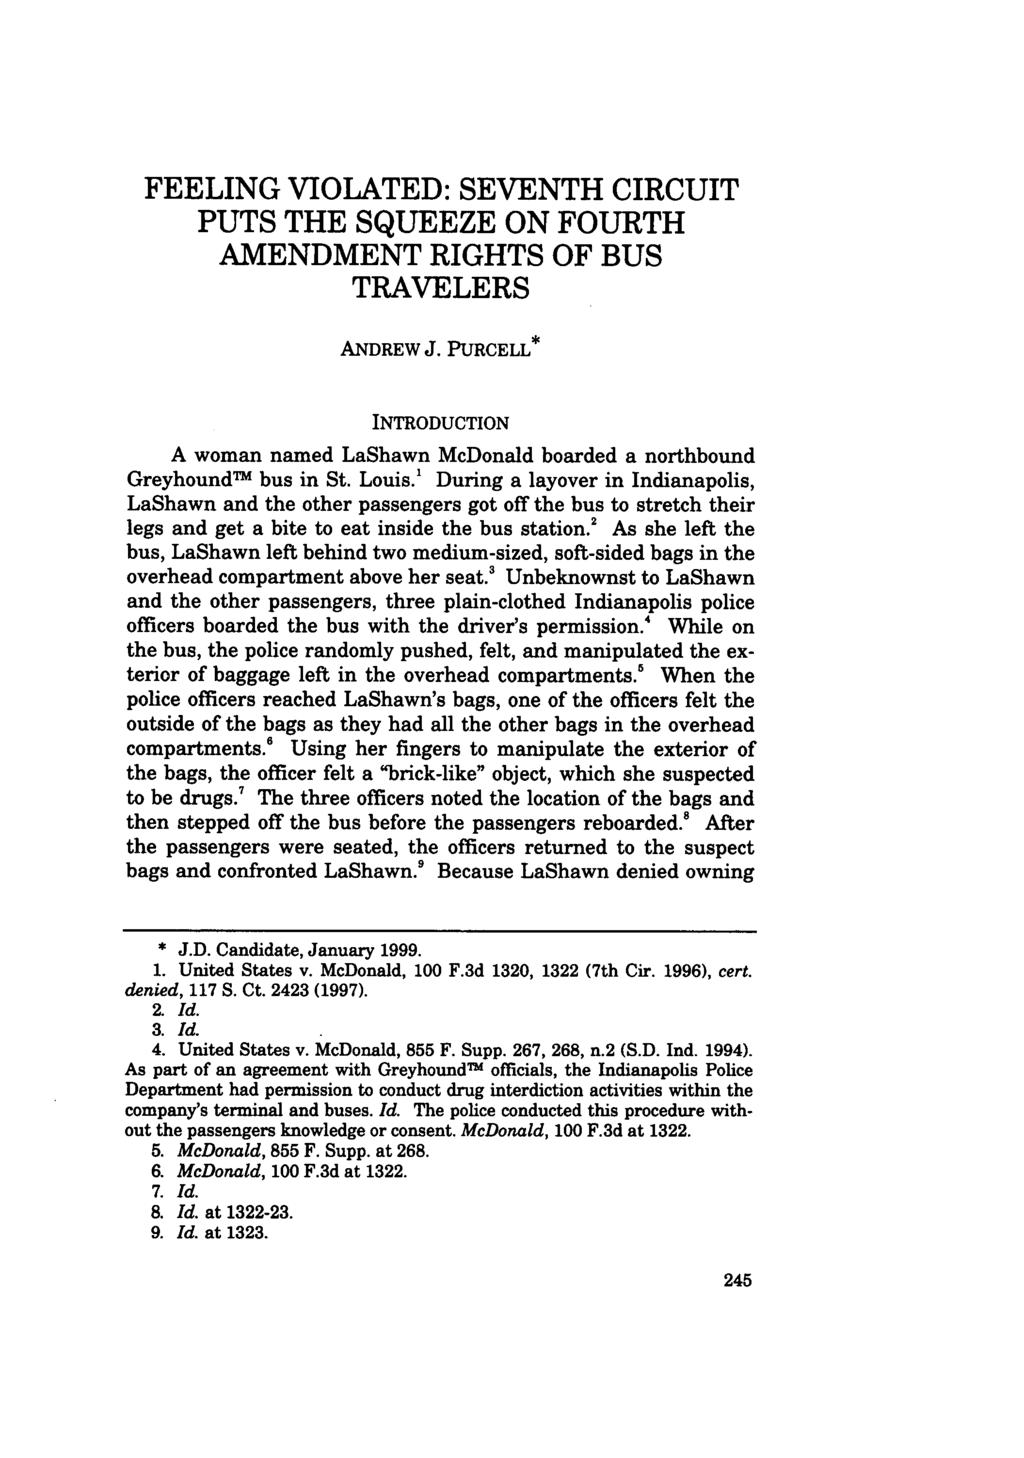 FEELING VIOLATED: SEVENTH CIRCUIT PUTS THE SQUEEZE ON FOURTH AMENDMENT RIGHTS OF BUS TRAVELERS ANDREW J.